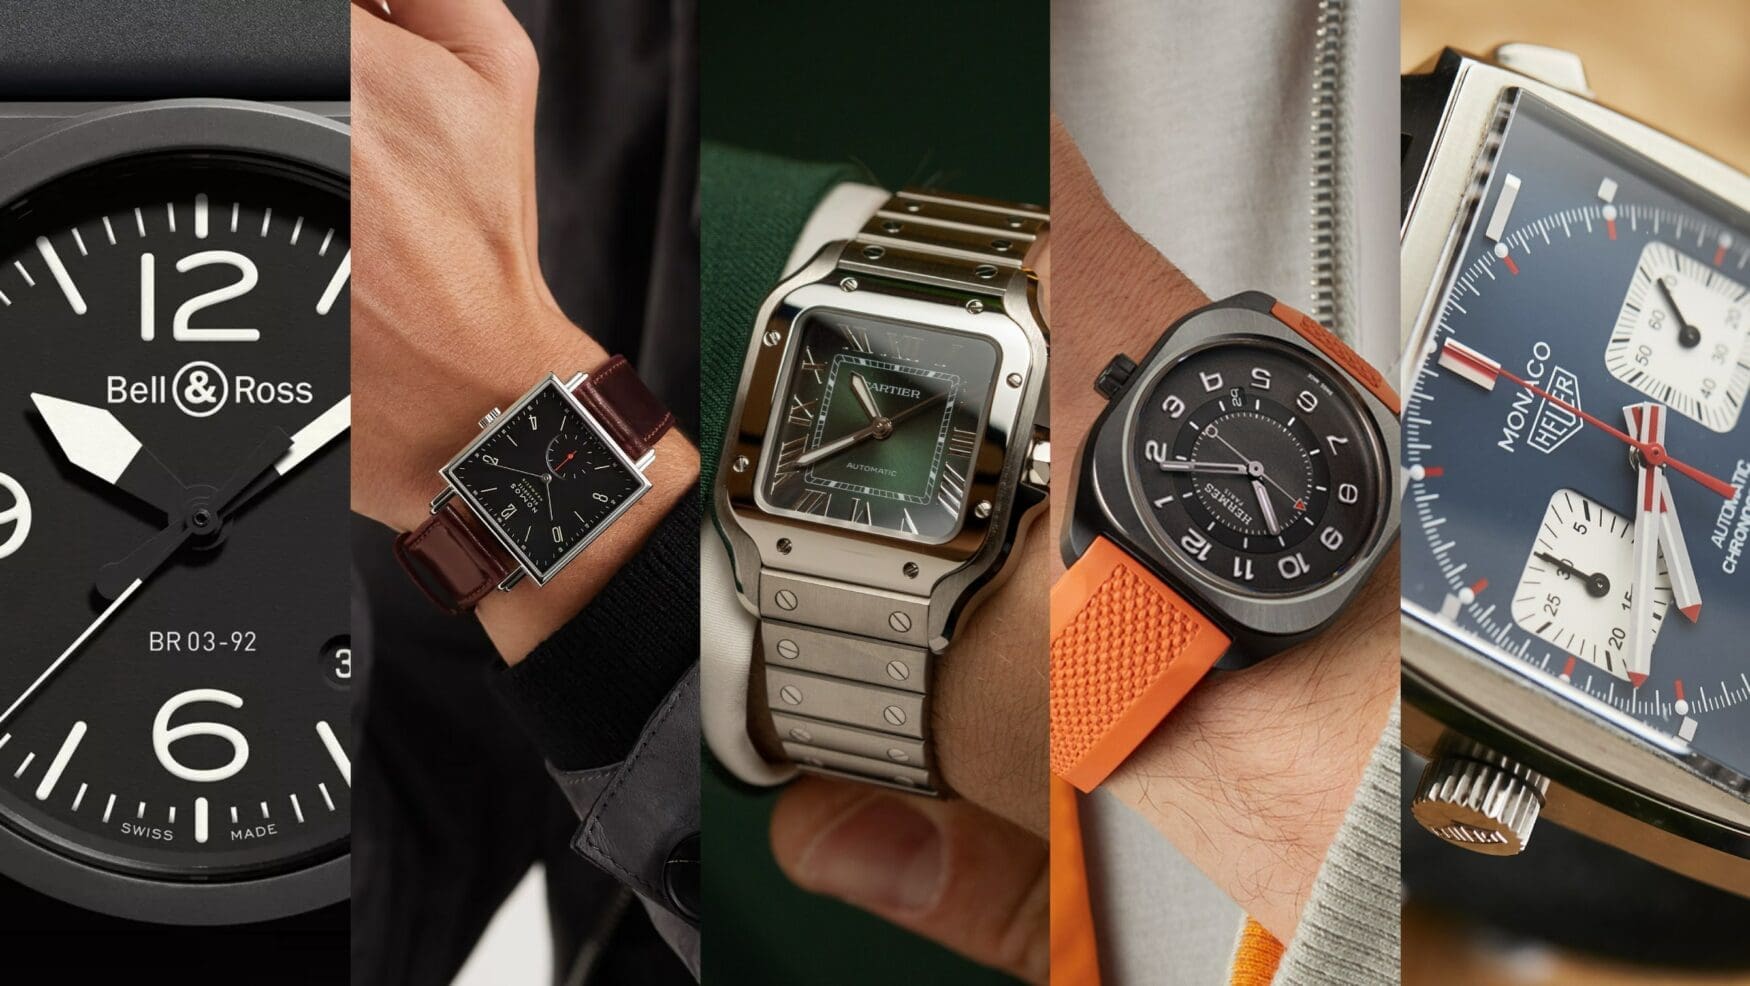 The 5 best square watches